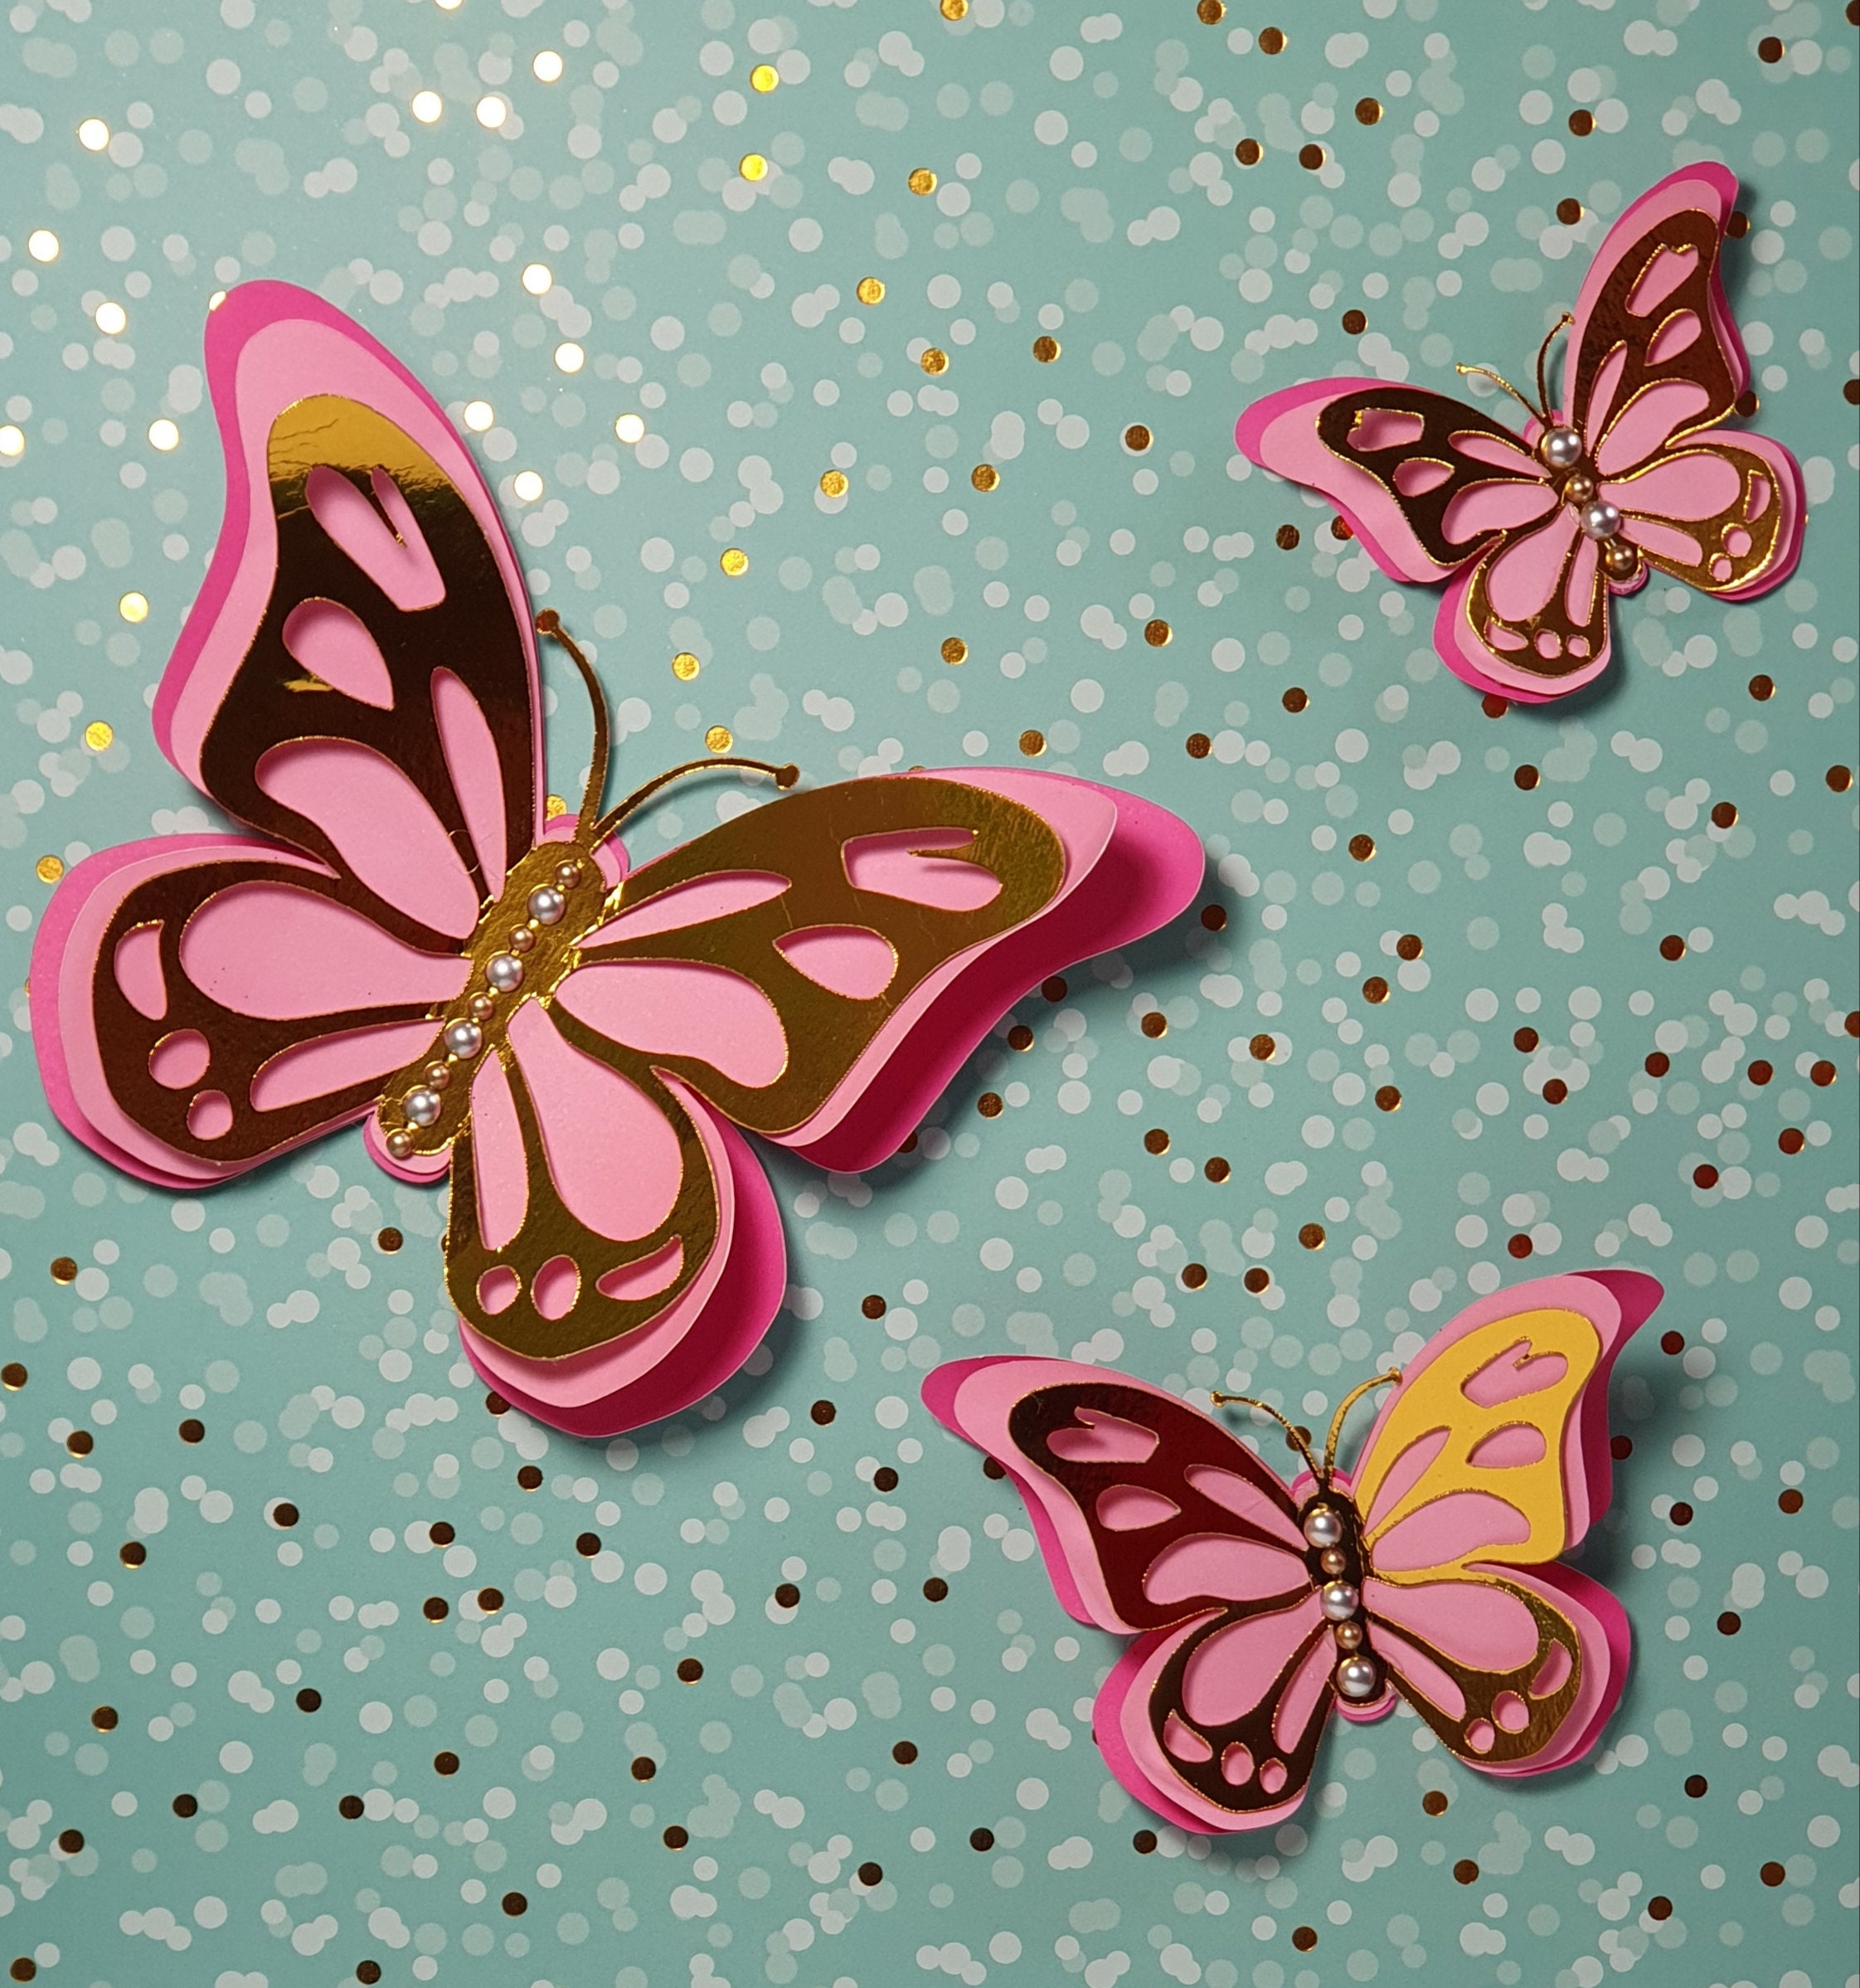 Butterfly Party Birthday Cake Decorations Kids Bedroom Black Butterfly Decorations 3 Styles 3 Sizes Room Decor 72Pcs 3D Butterfly Wall Decor 3D Paper Butterflies Wall Stickers Decals for Girls 